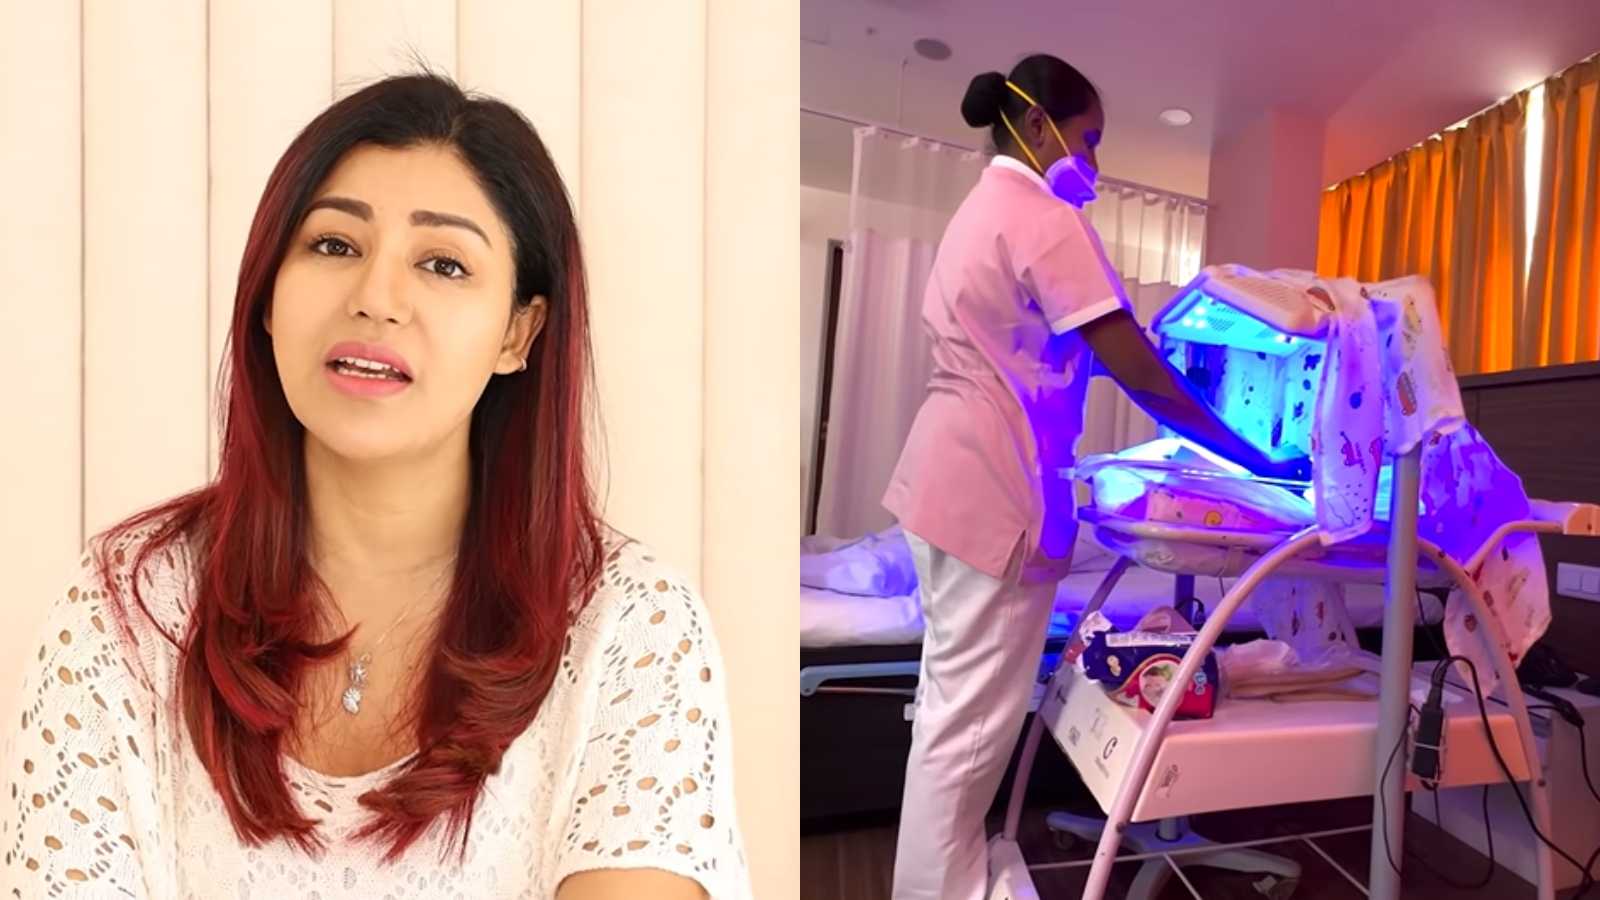 Debina Bonnerjee and Gurmeet Choudhary's daughter was diagnosed with jaundice with 'dangerous' bilirubin levels 5 days after birth